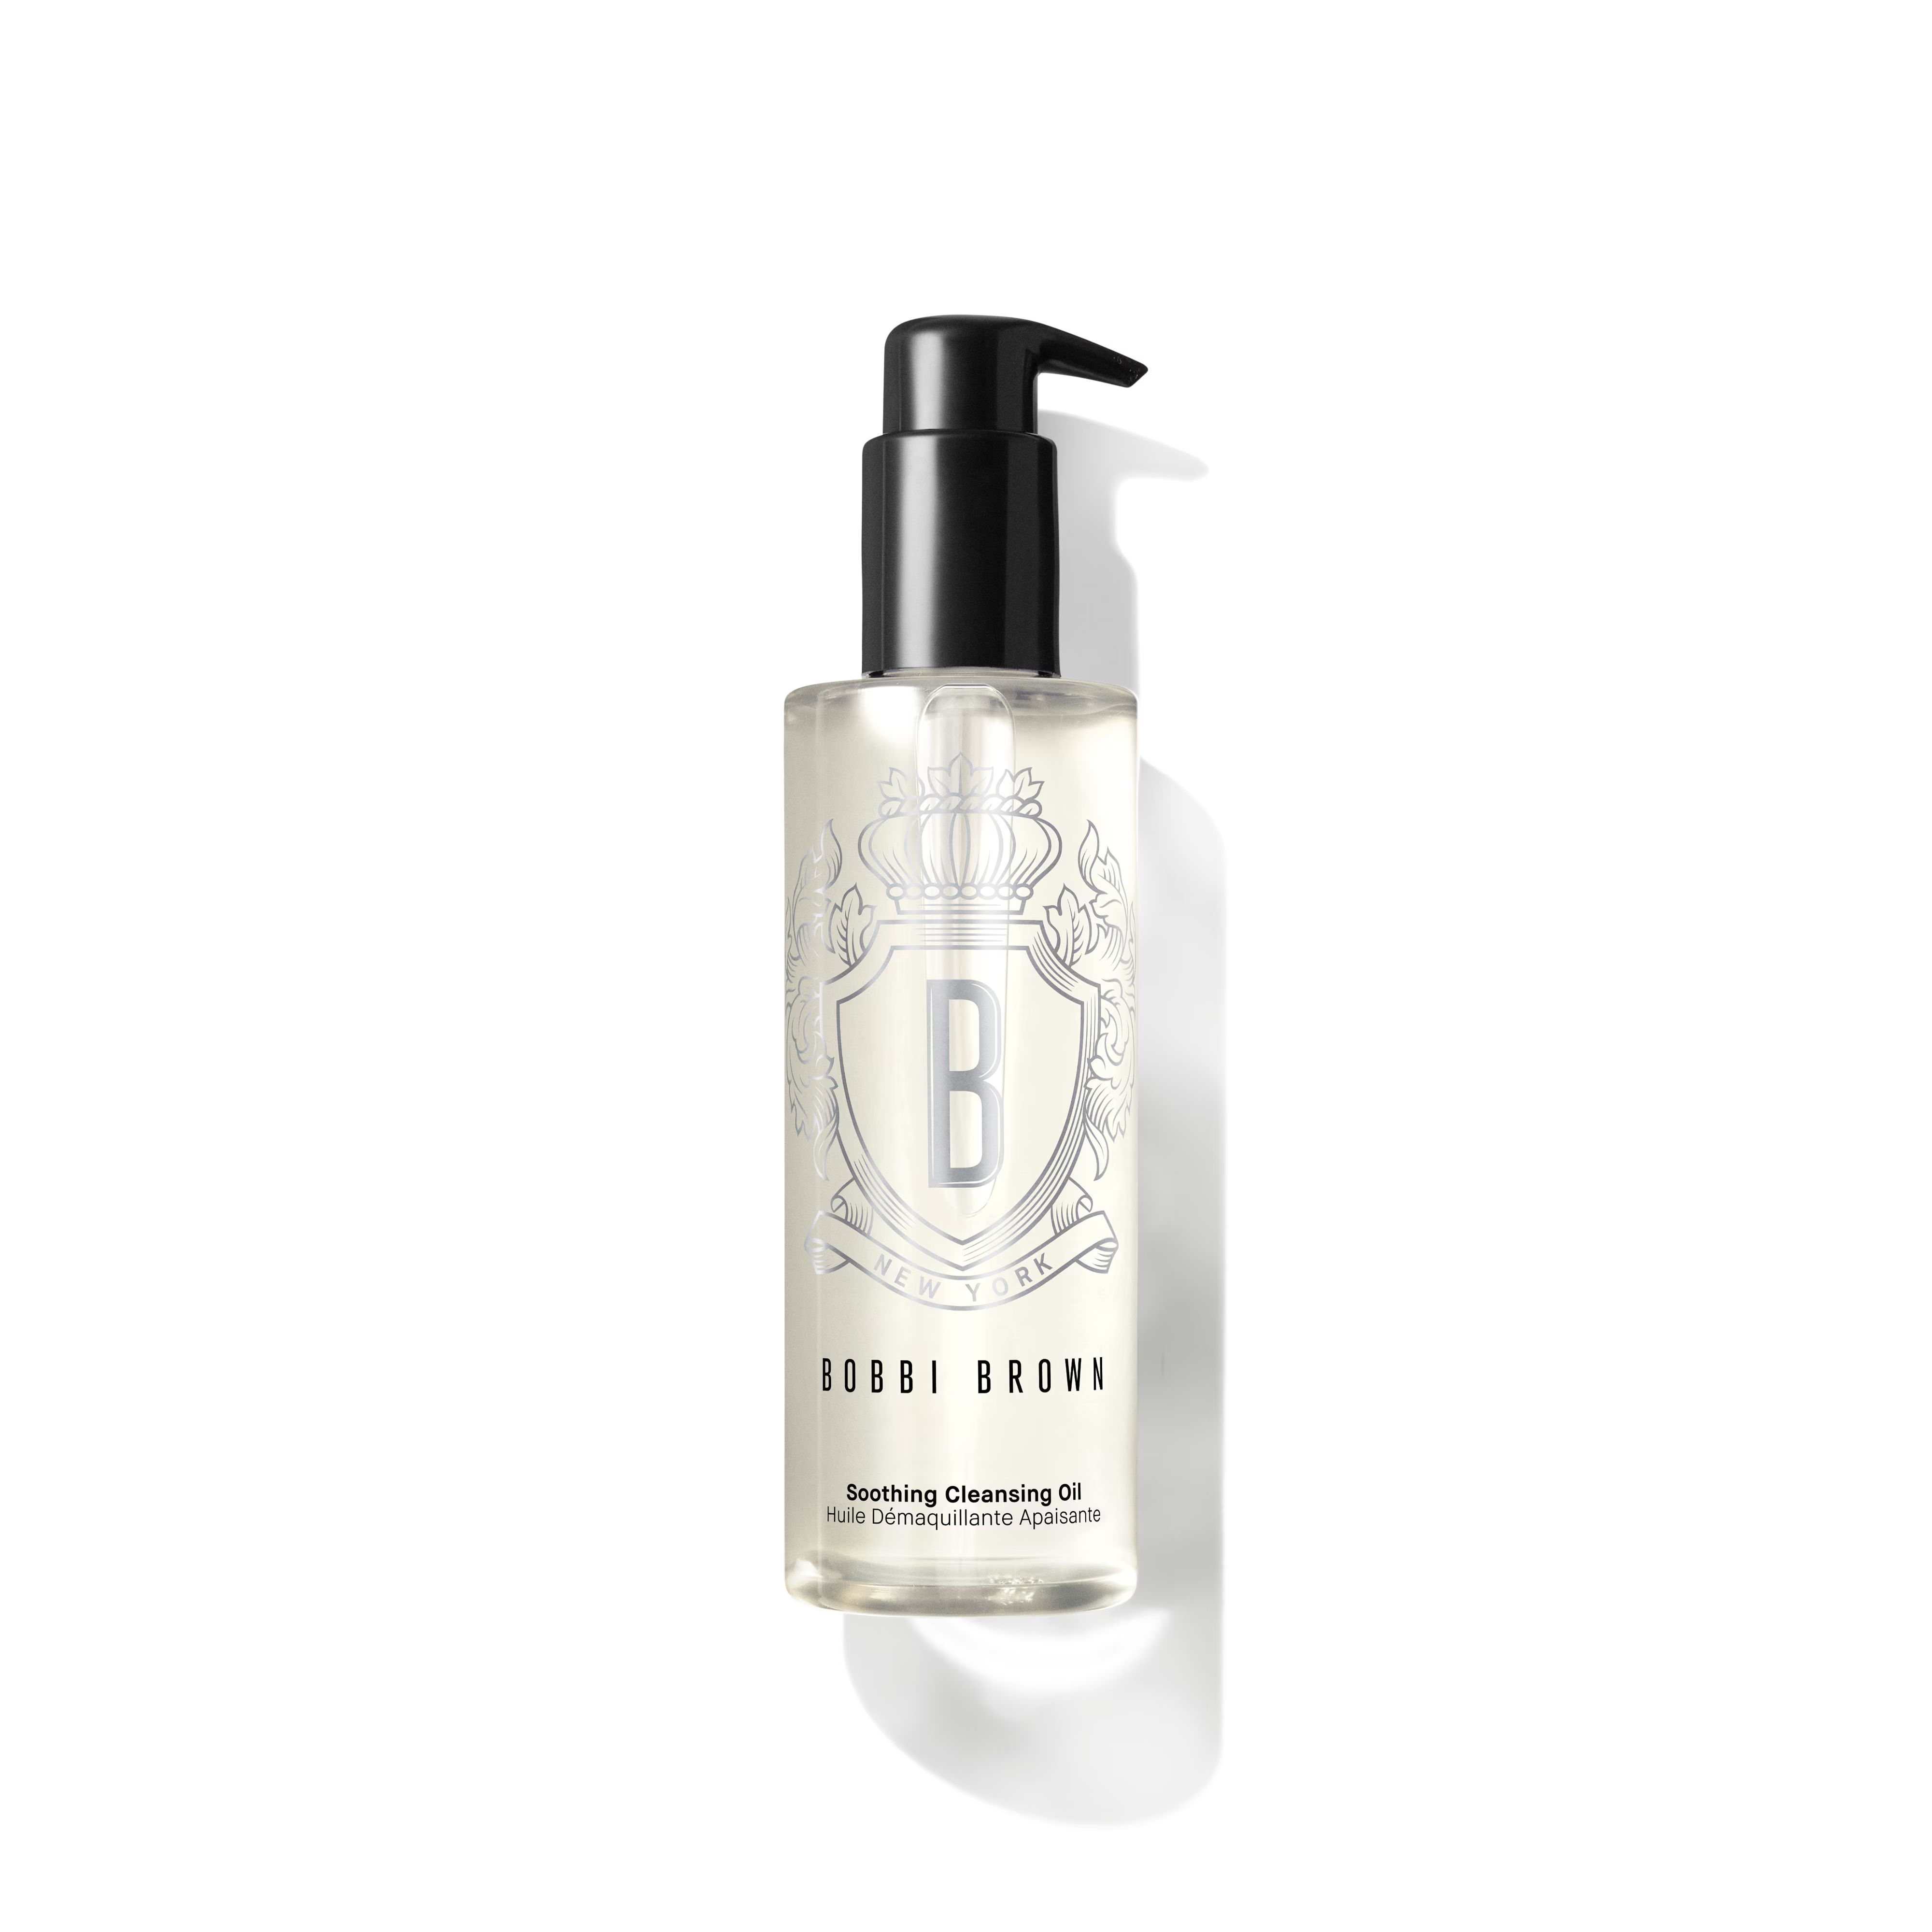 Soothing Cleansing Oil Facial Cleanser | Bobbi Brown (US)